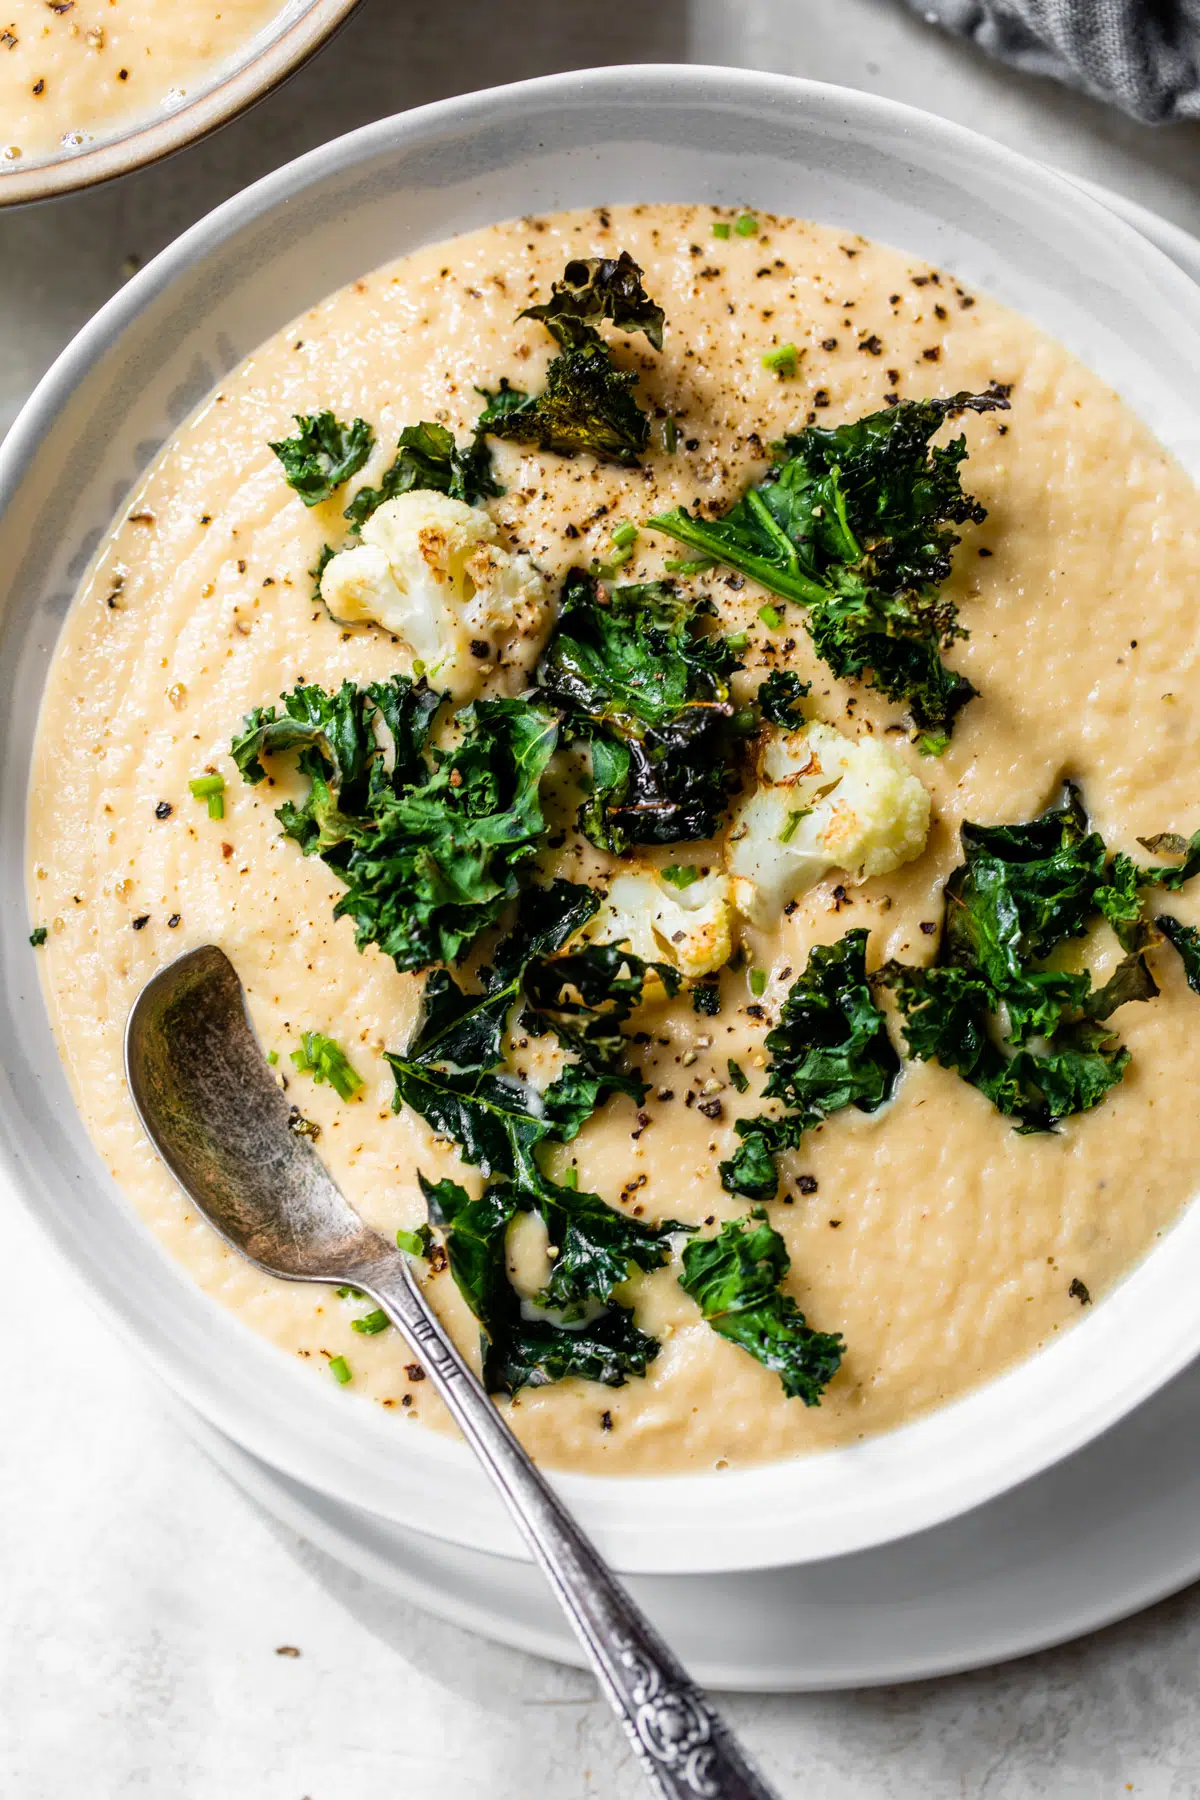 a bowl of creamy yellow-colored soup topped with cauliflower florets and kale chips